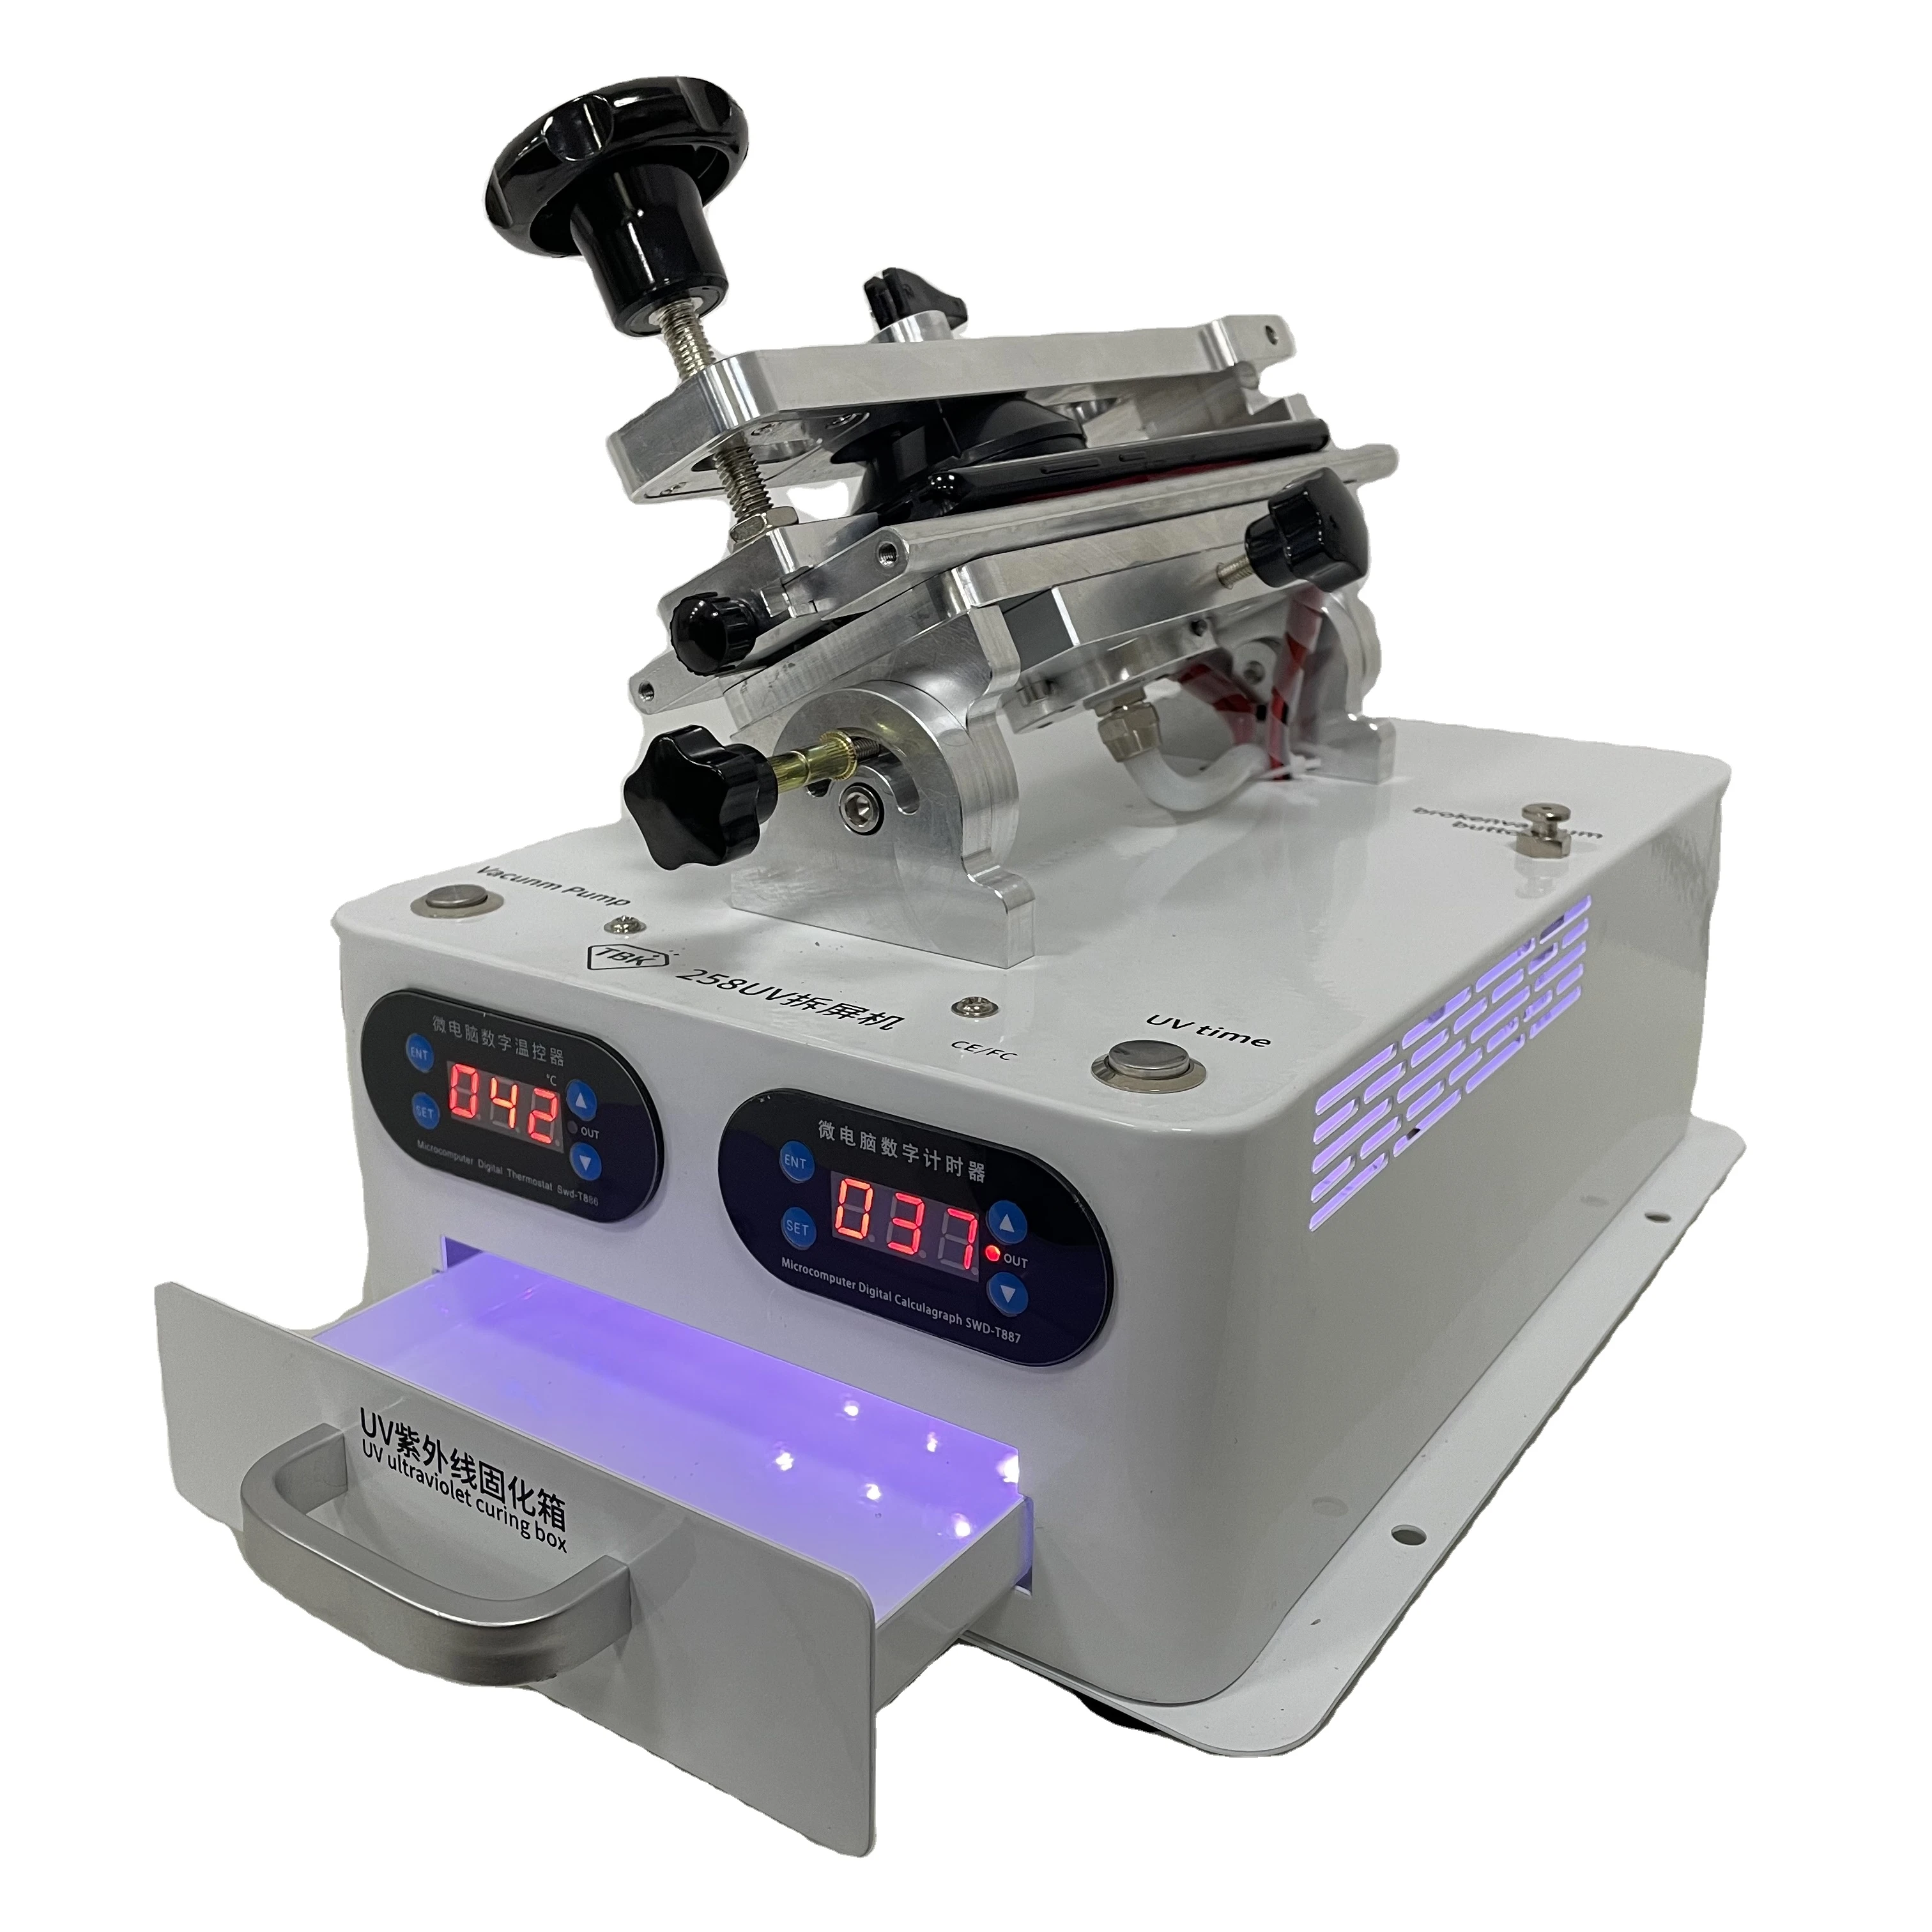 

2021 Newest TBK-258 LCD Separator With UV Curing Box Screen Separation Machine With Pump Vacuum Mobile Phone Repair Tool